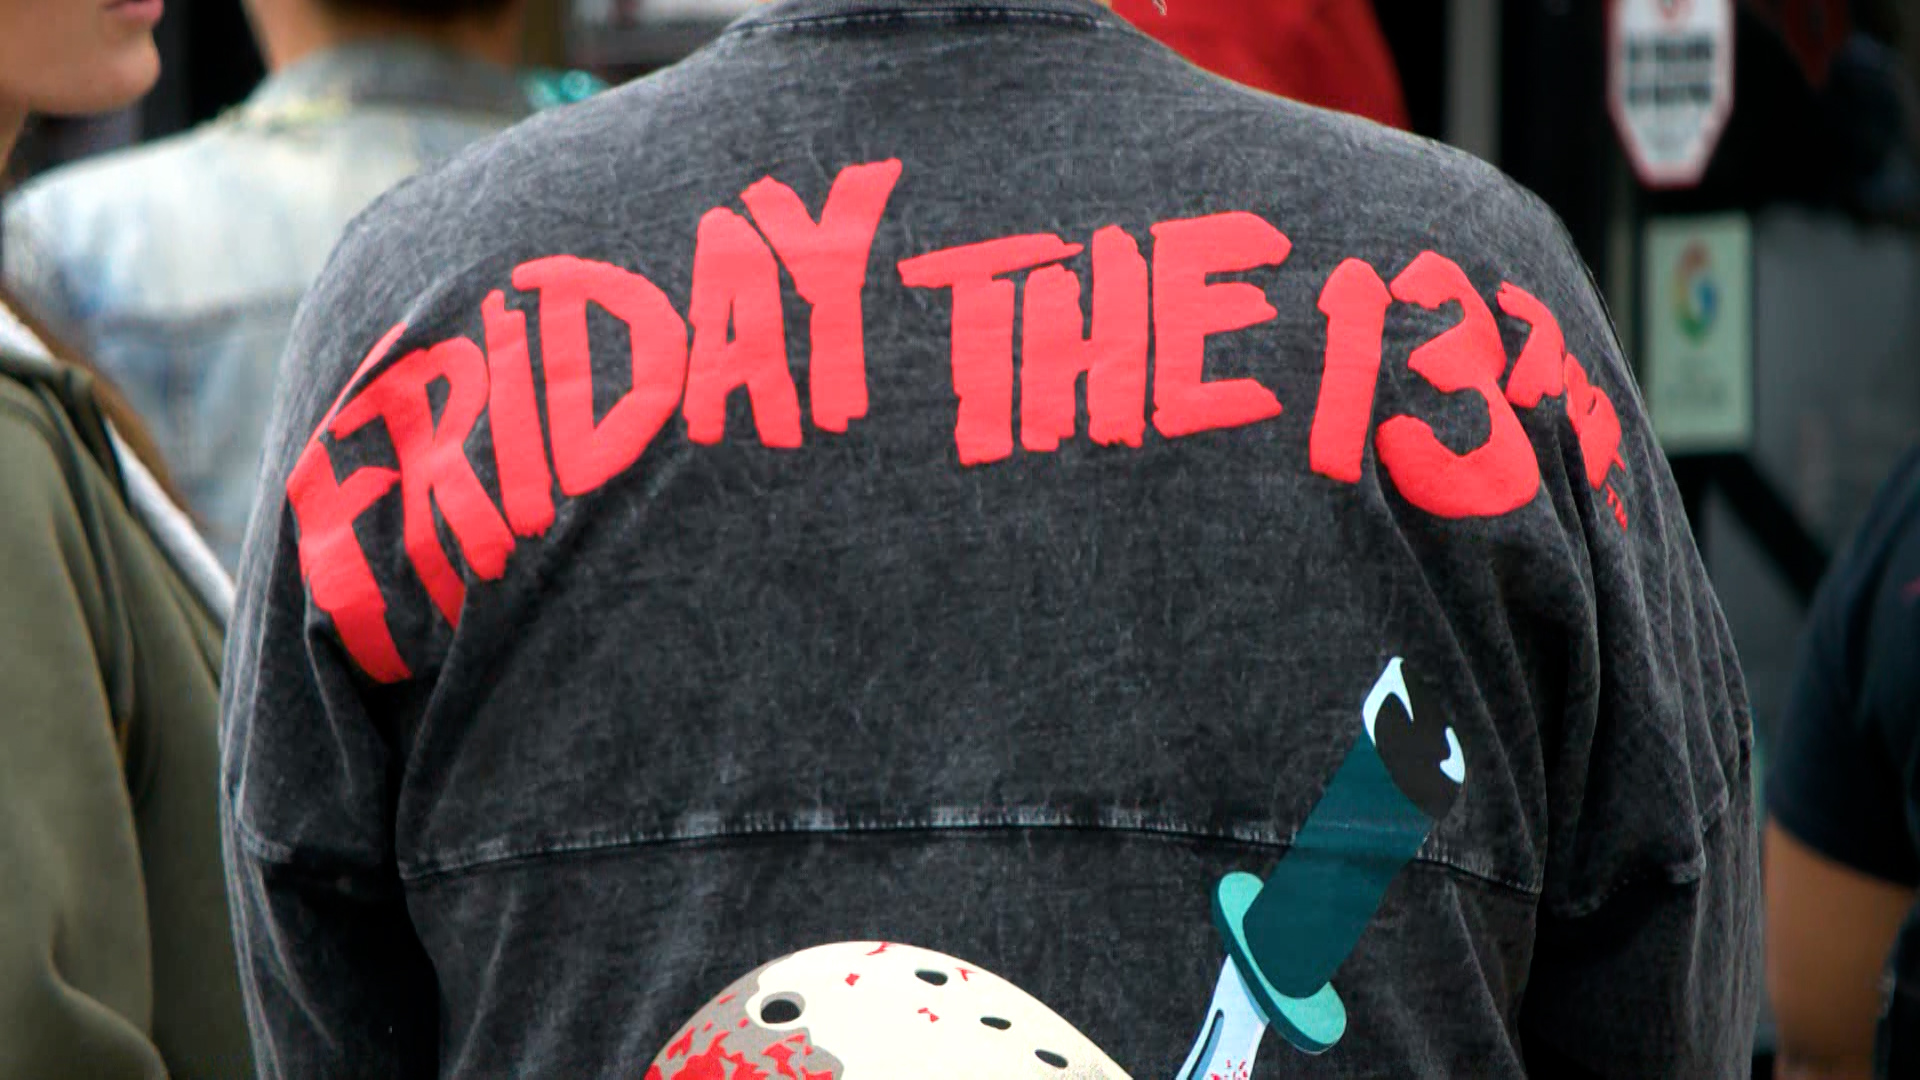 Friday the 13th - Plugged In